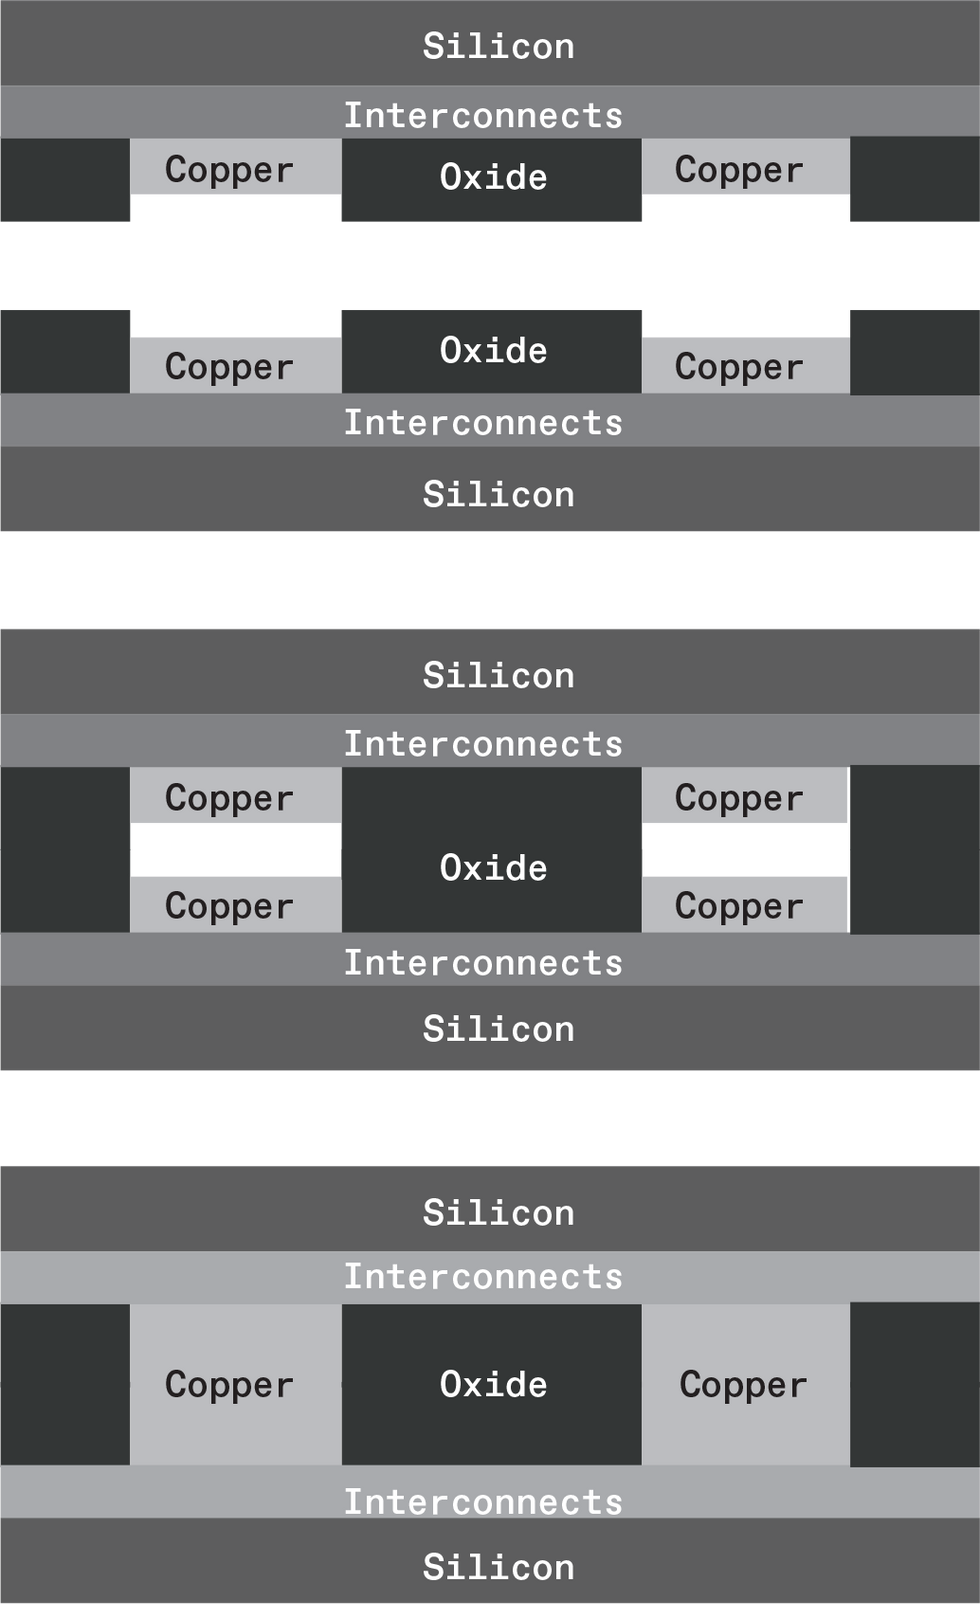 An illustration of silicon, interconnects, copper and oxide.